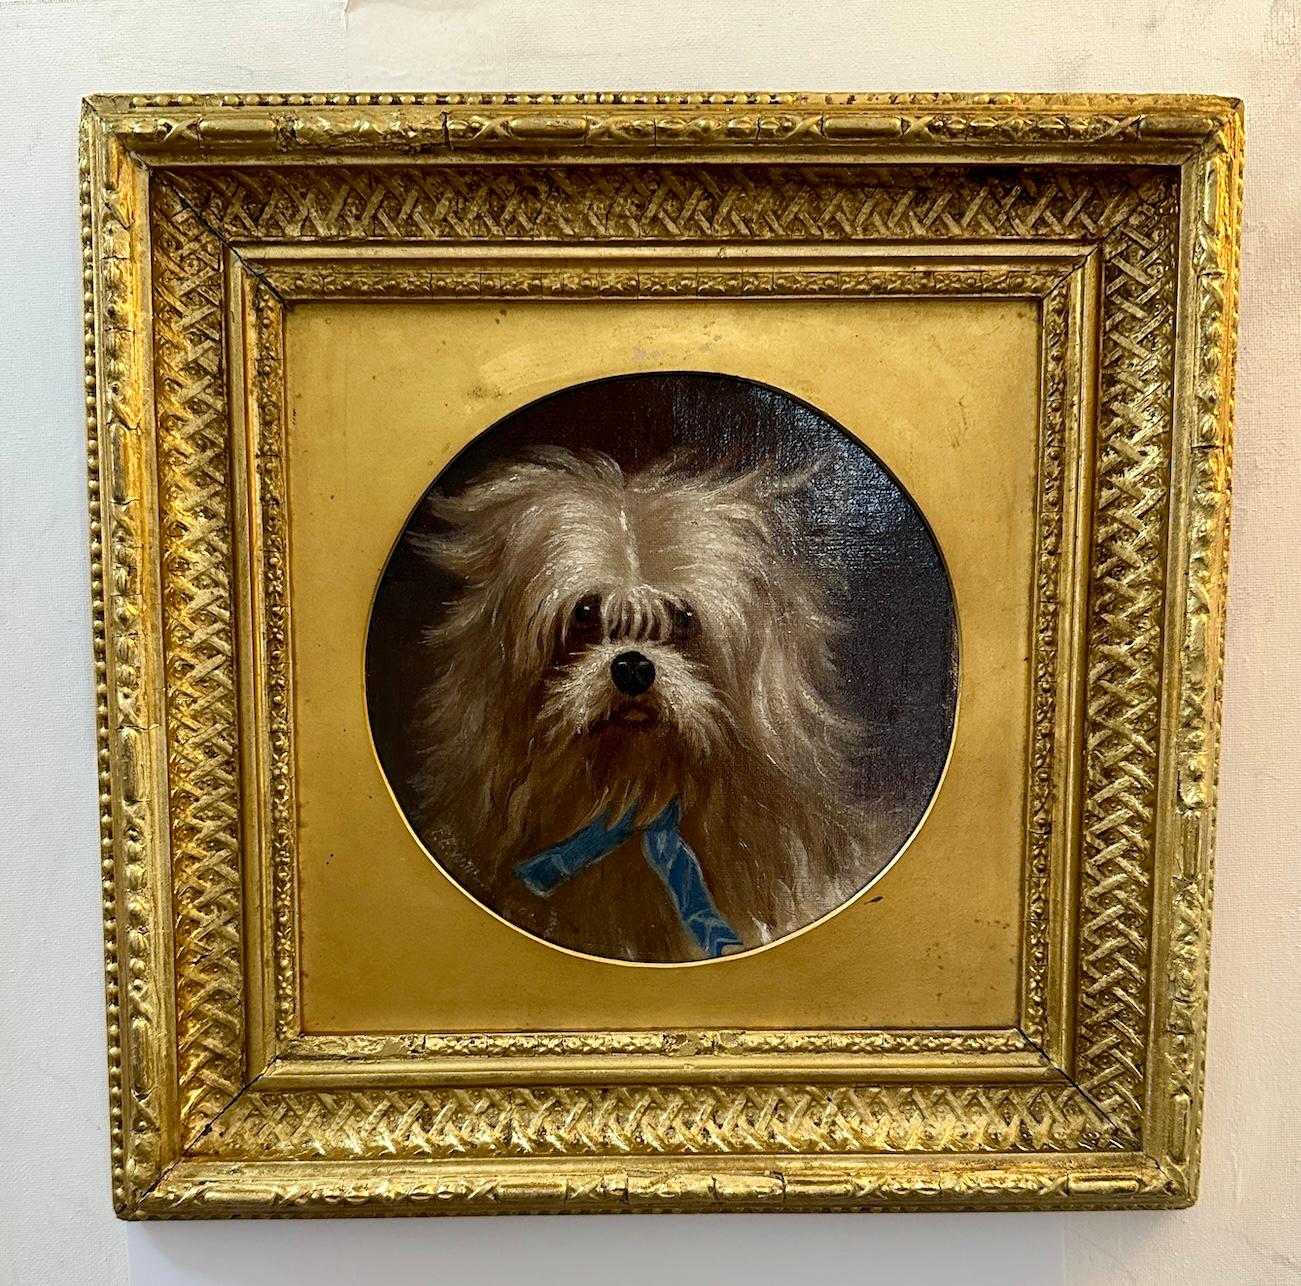 F.W.Williams Animal Painting - 19th century English portrait of a dogs head, a terrier, or Bichon